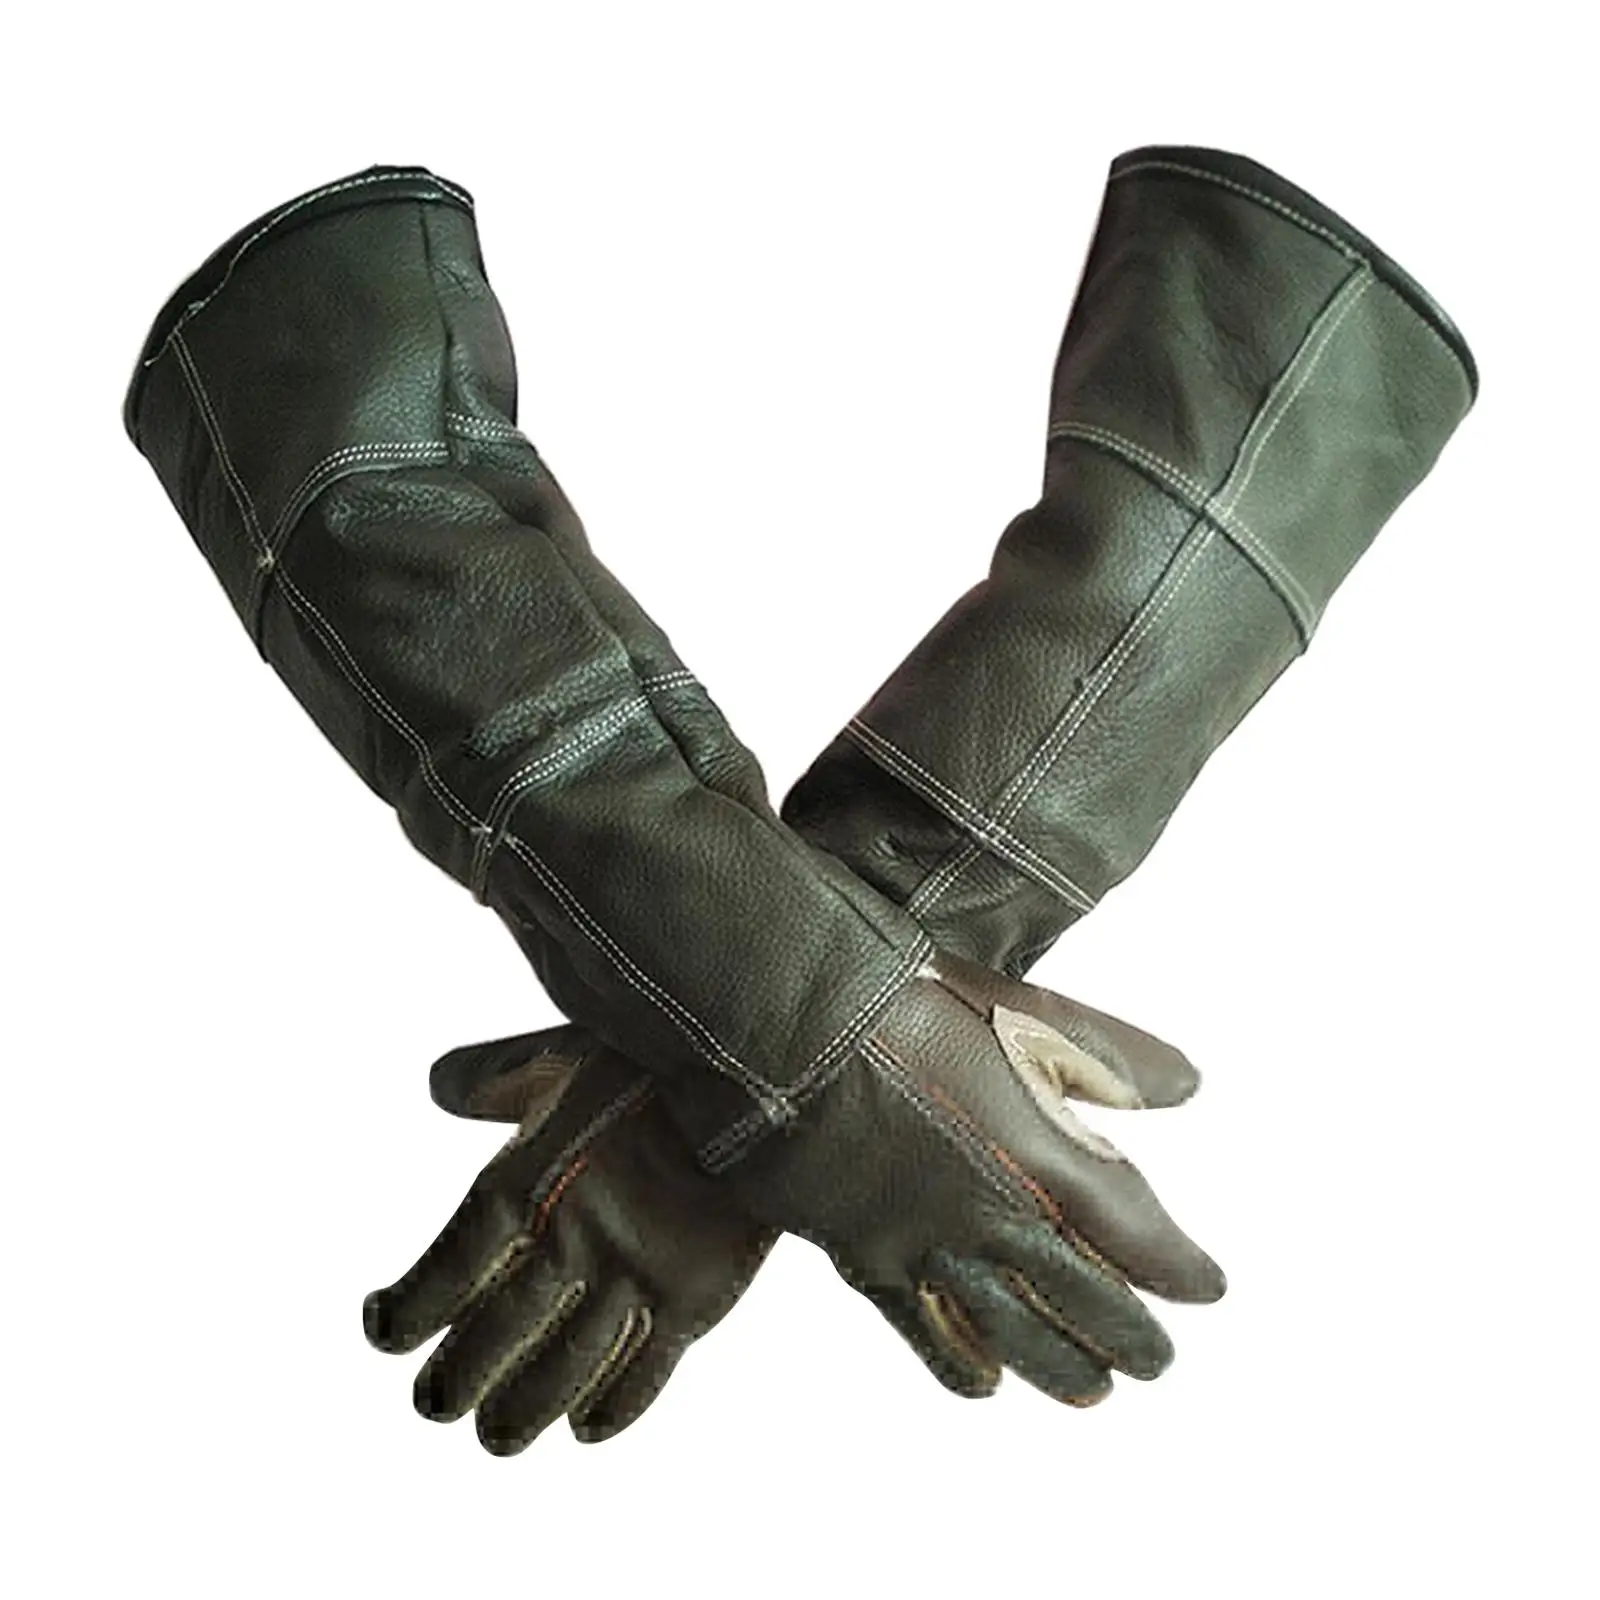 2pc Anti-bite safety bite gloves for Catch dog,cat,reptile,animal long leather greenPets grasping biting protective gloves